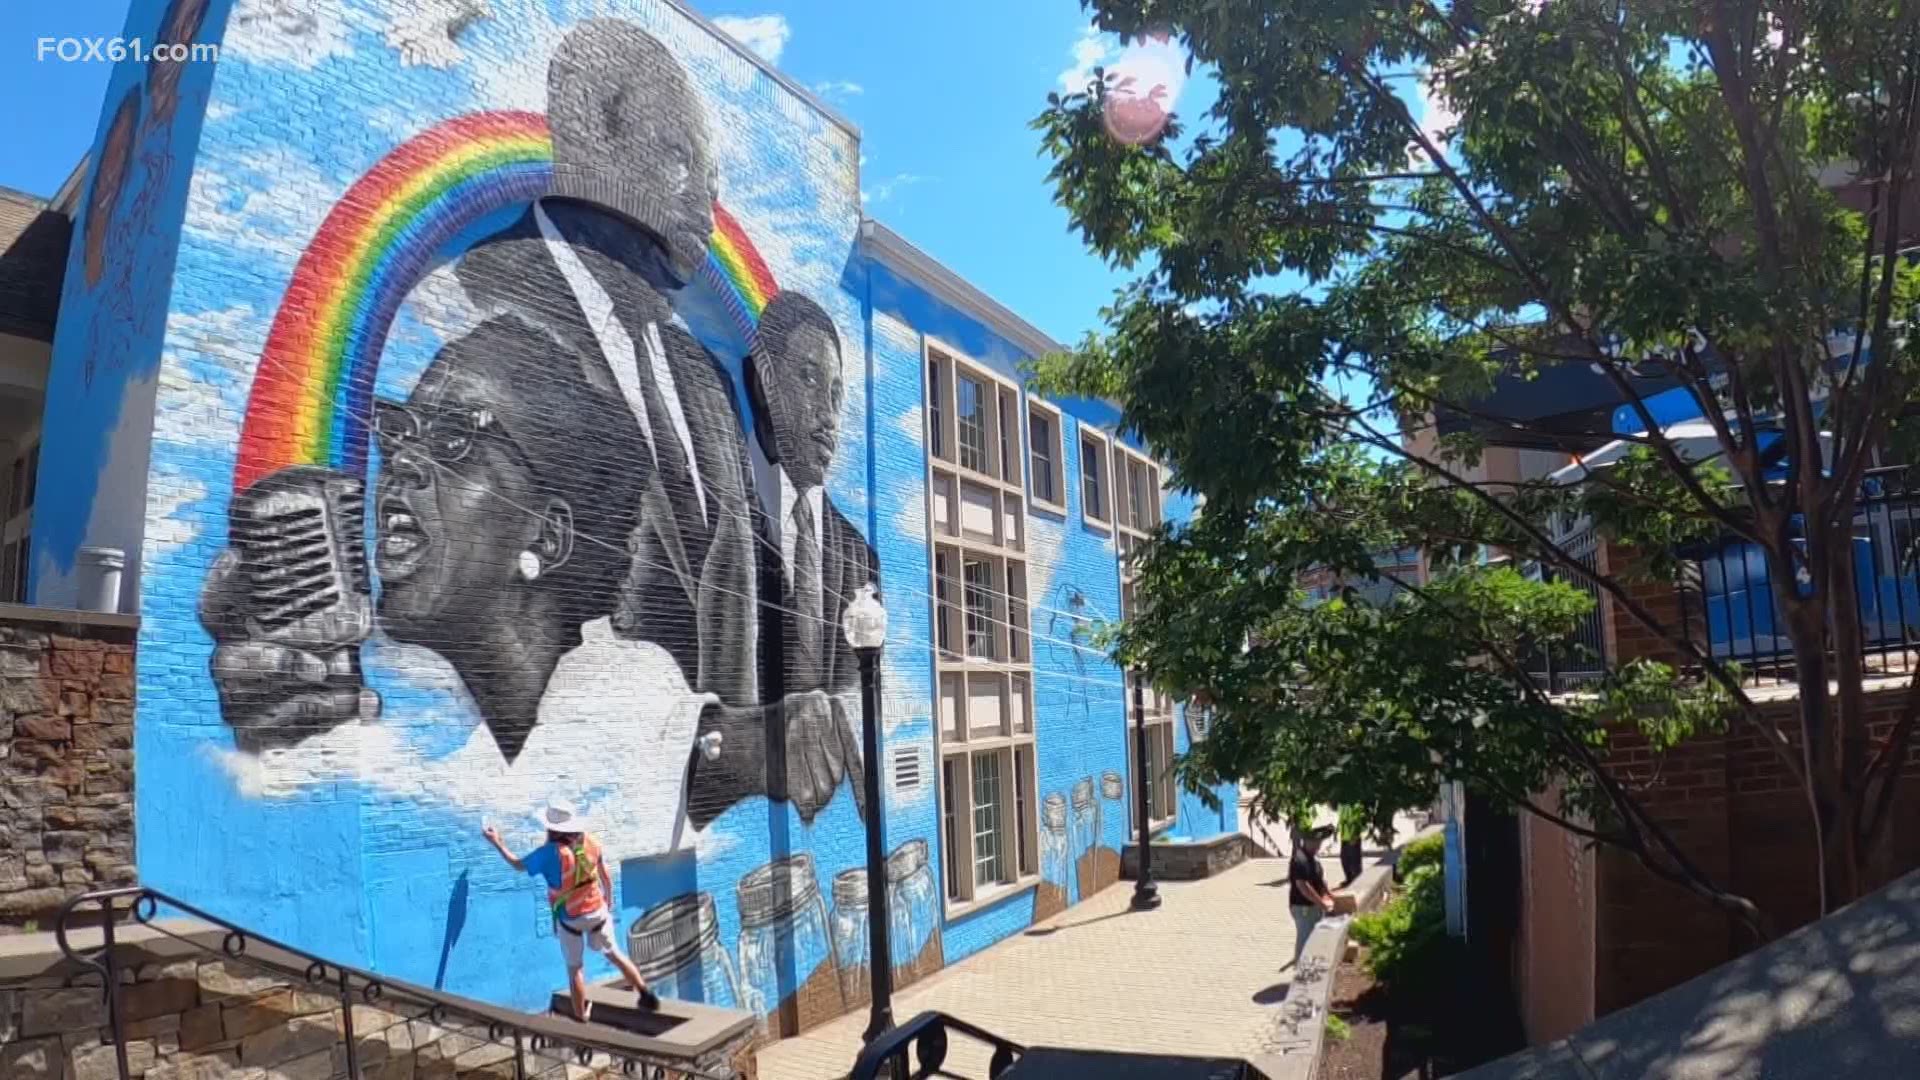 After nearly a week, artist Corey Pane – the steady hand behind the mega mural on Pearl Street in Downtown Hartford – is putting the finishing touches on the mural.